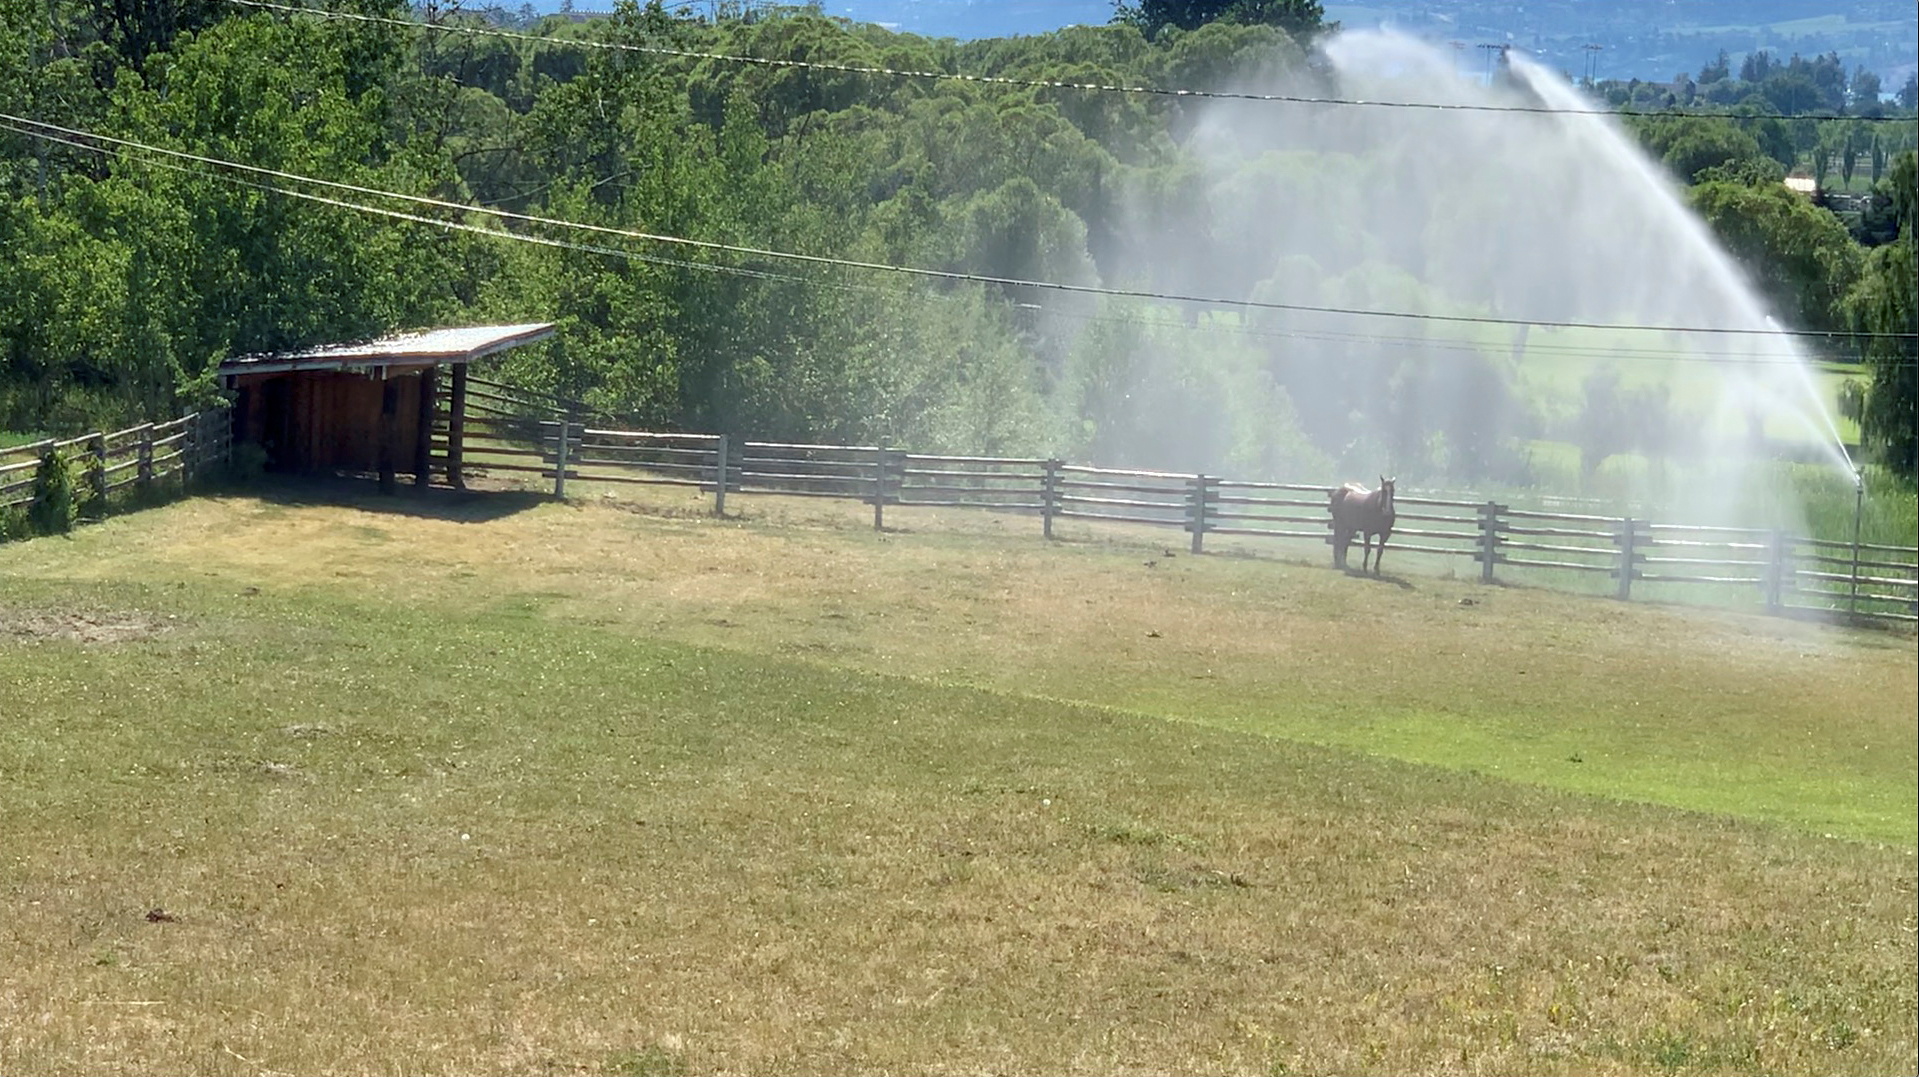 Sprinklers spray water on a horse amid a heatwave in Kelowna, British Columbia, Canada